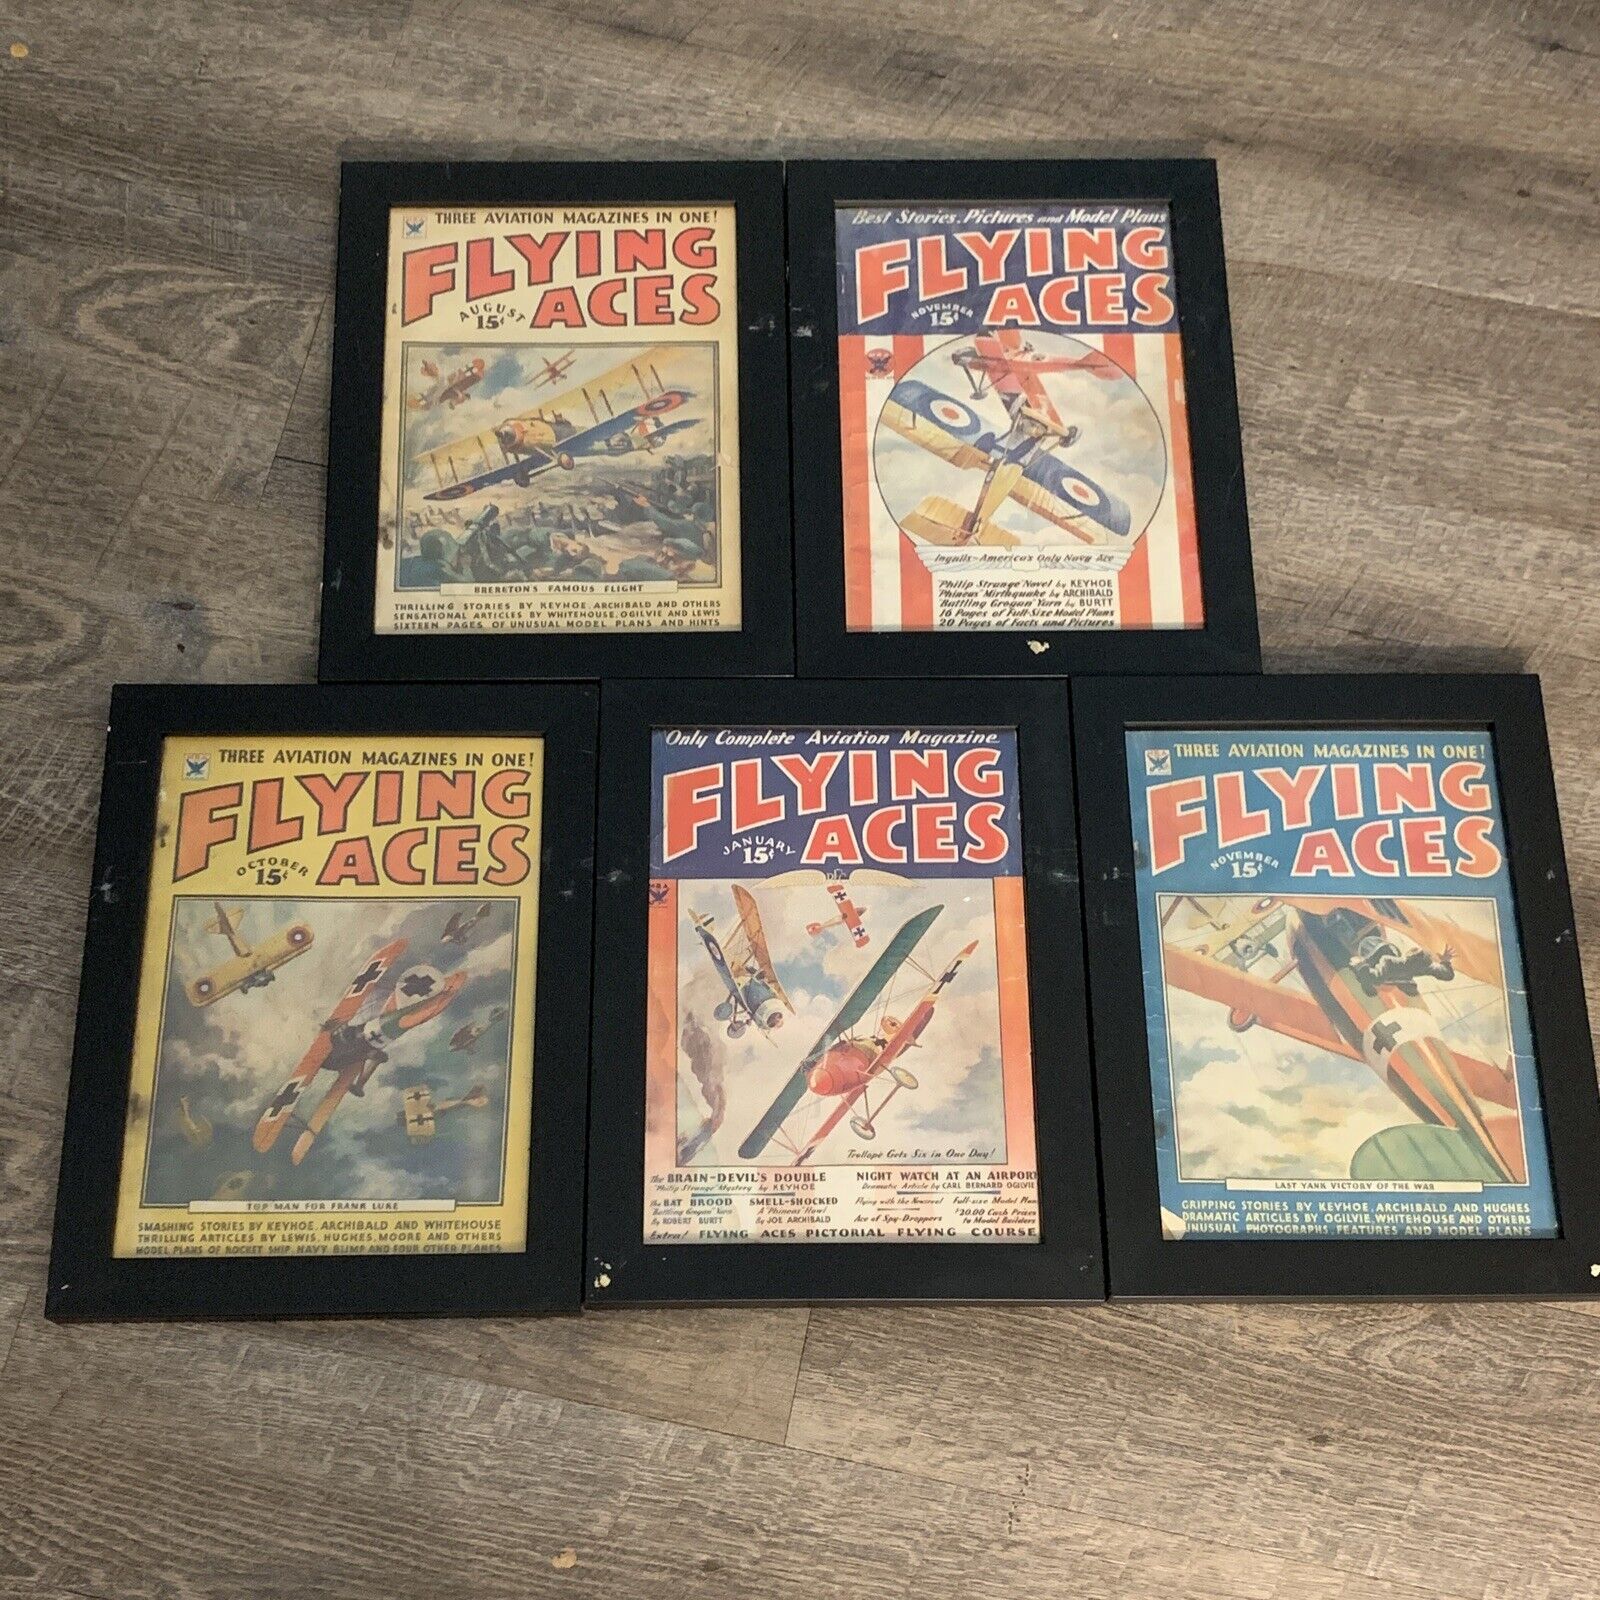 5 professionally framed FLYING ACES comic books